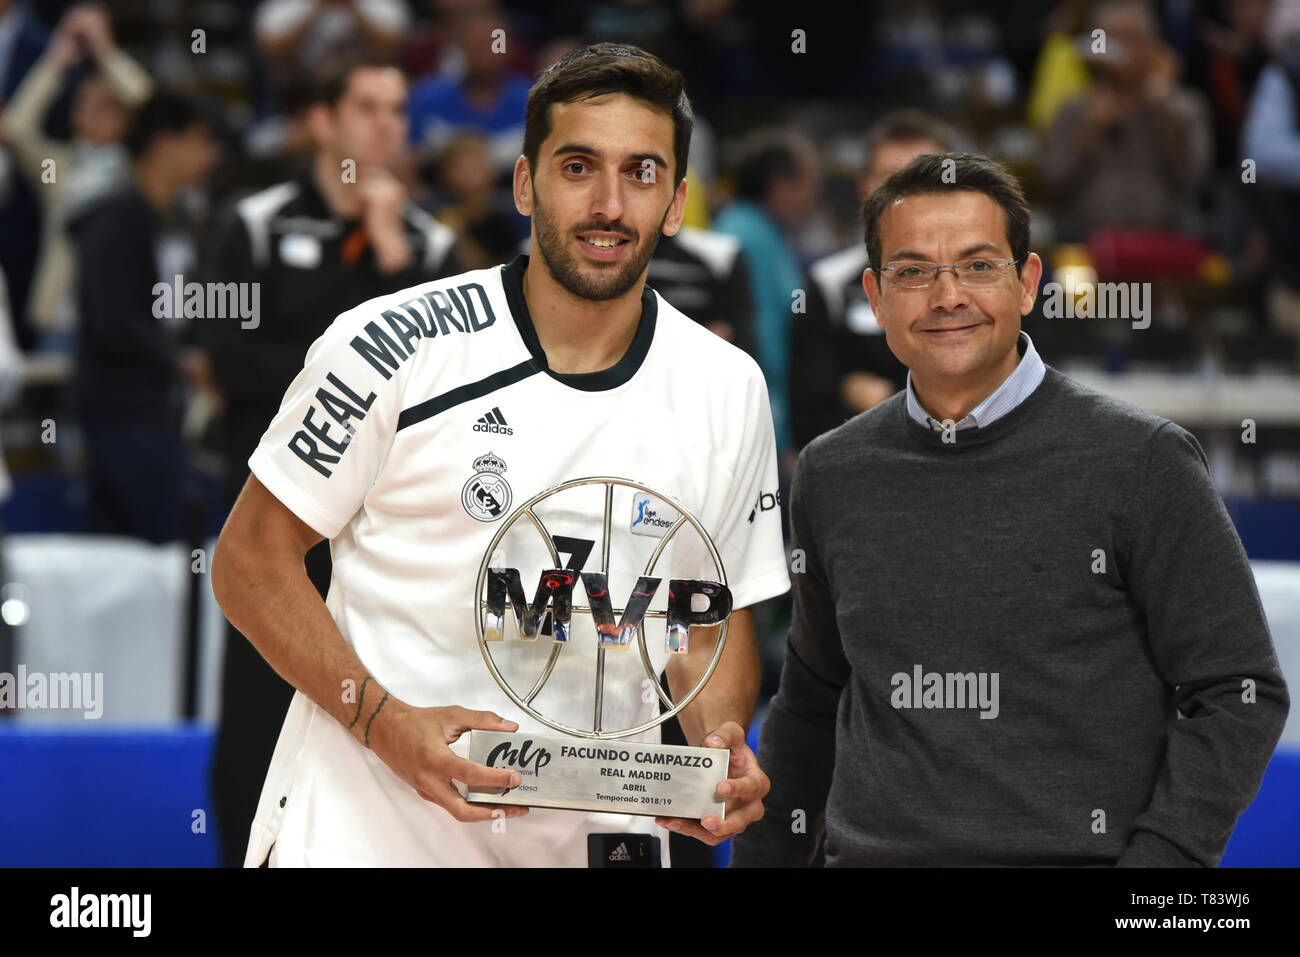 Facundo Campazzo, #11 of Real Madrid seen holding an MVP trophy during the 2018/2019 Liga Endesa Regular Season Game (day 31) between Real Madrid and Movistar Estudiantes at WiZink center in Madrid. Final Score: Real Madrid 109 - 92 Movistar Estudiantes. Stock Photo